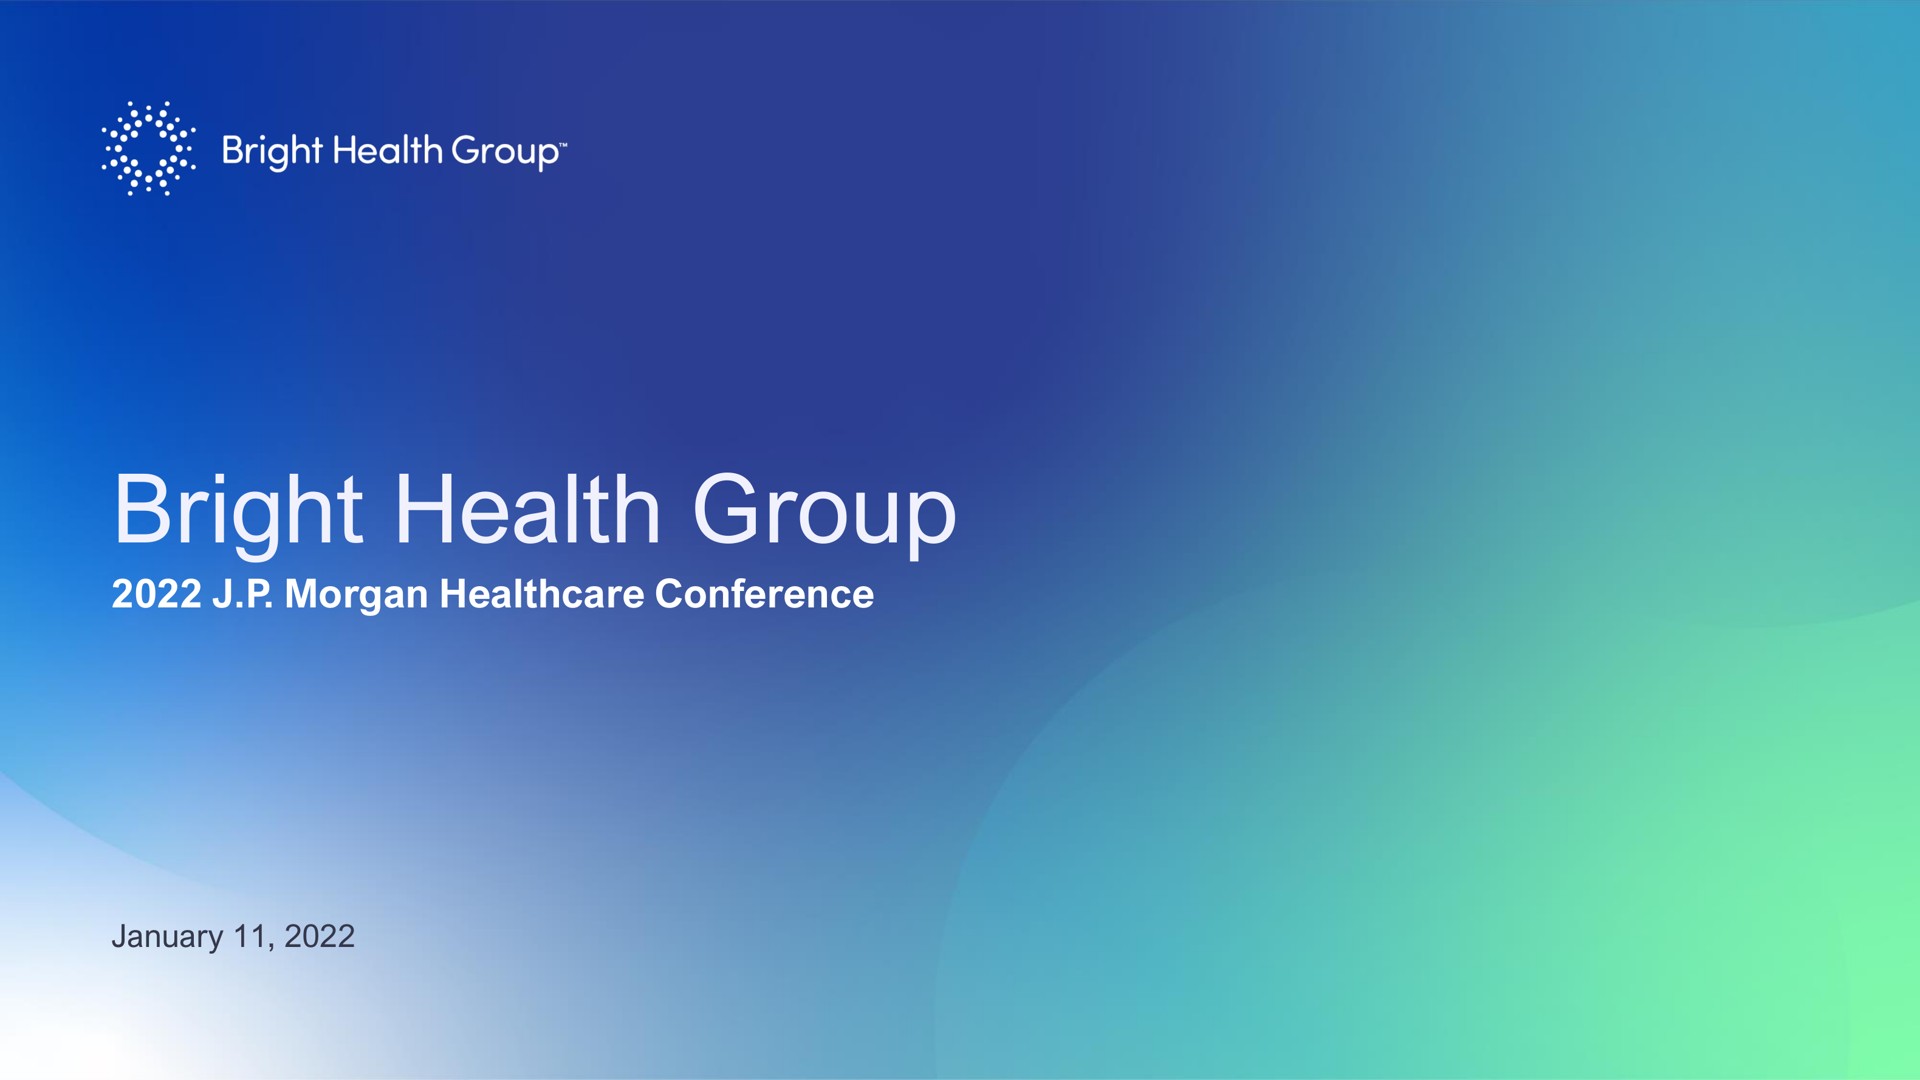 bright health group morgan conference aes | Bright Health Group